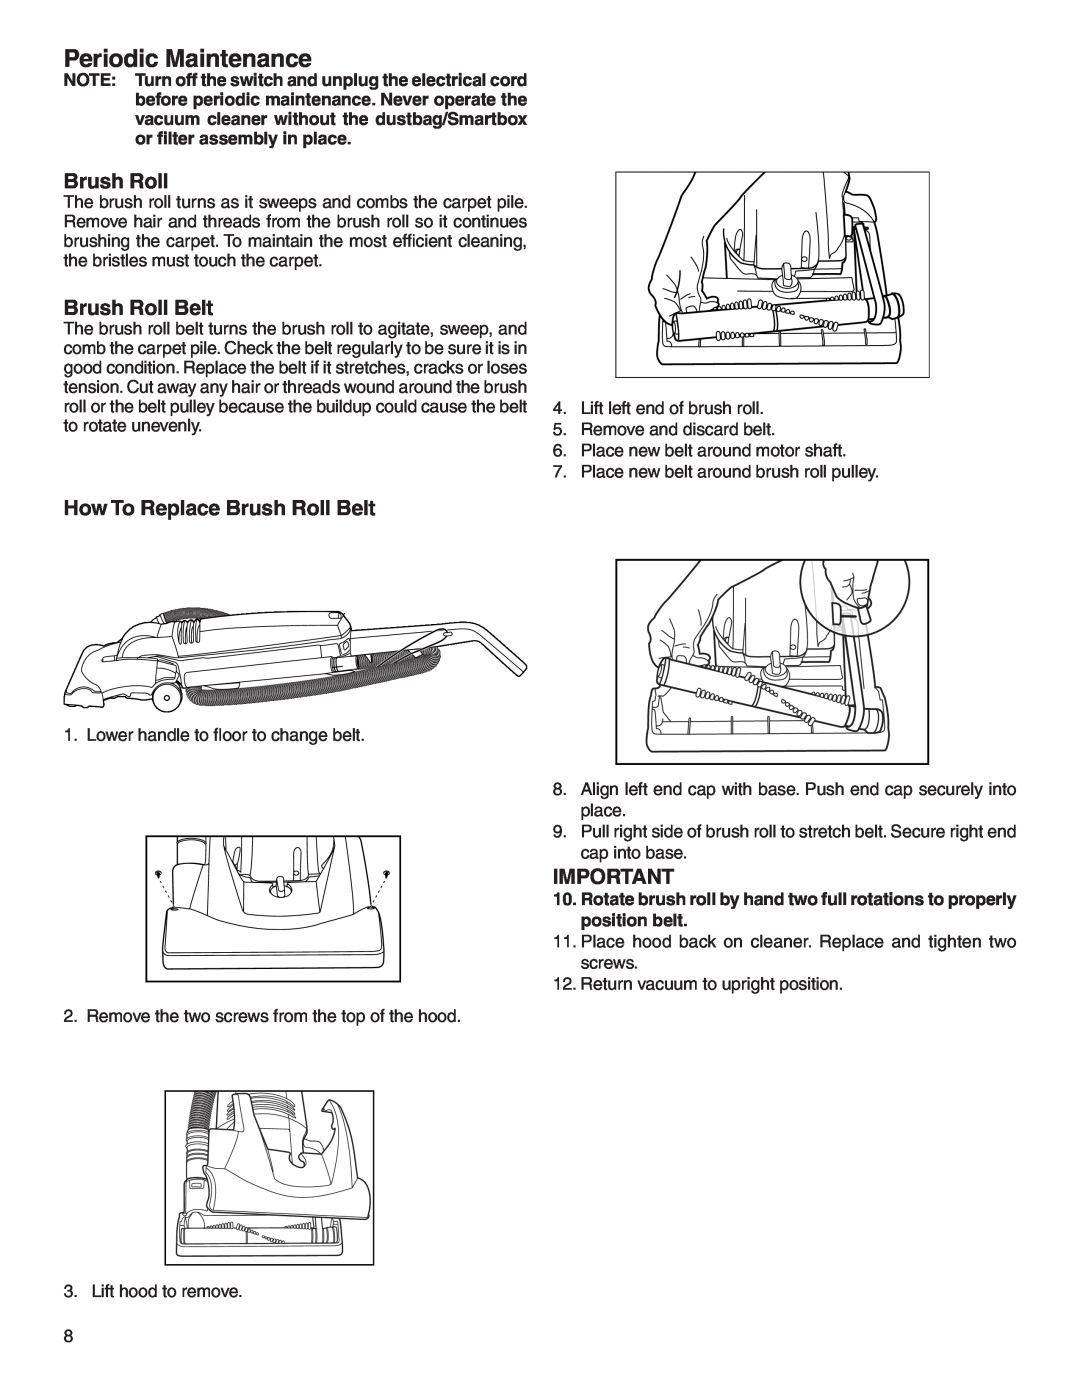 Electrolux Z2900 Series manual Periodic Maintenance, How To Replace Brush Roll Belt 